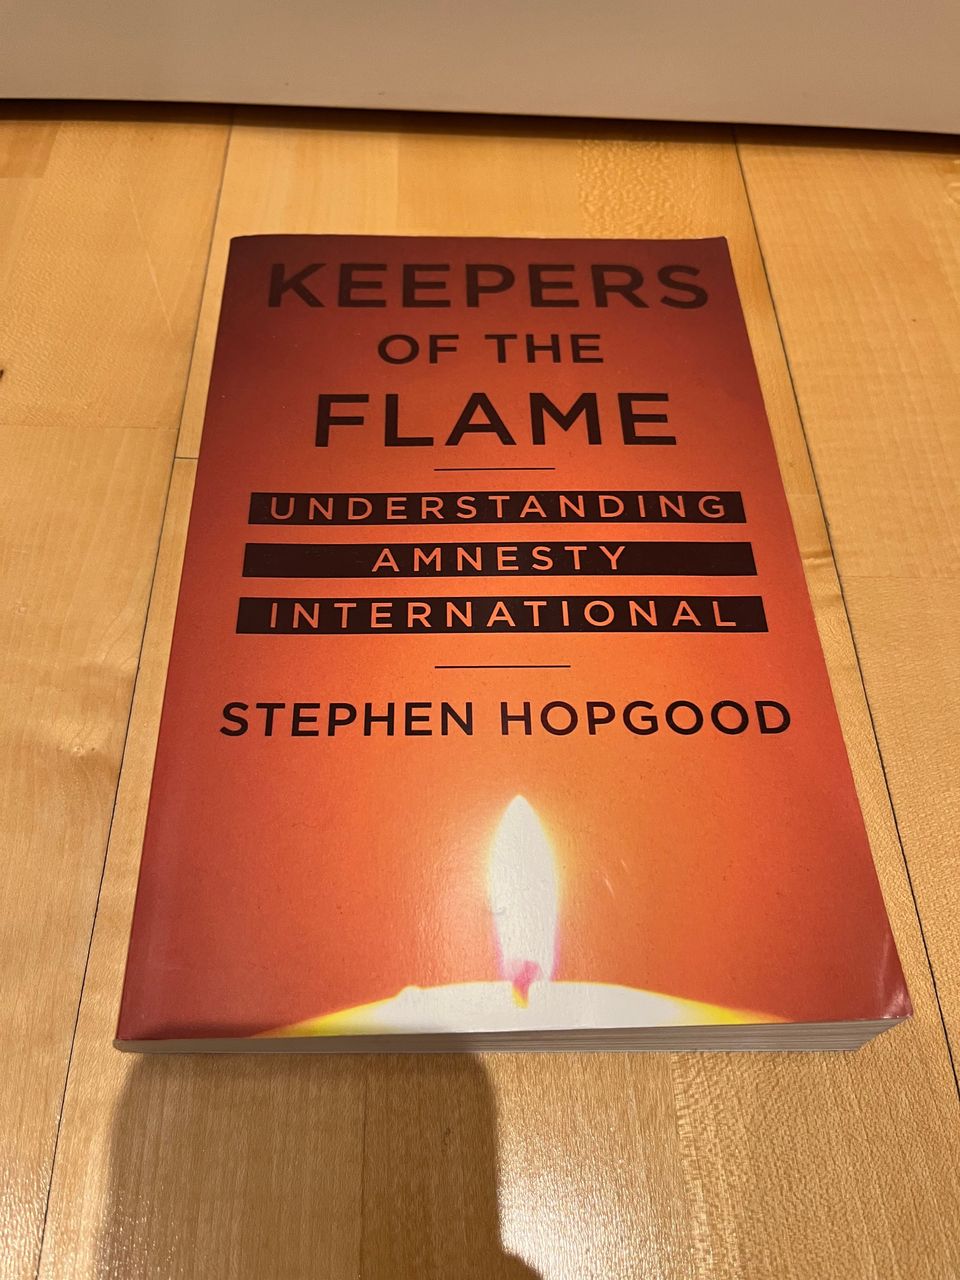 Keepers of the flame - Stephen Hopgood